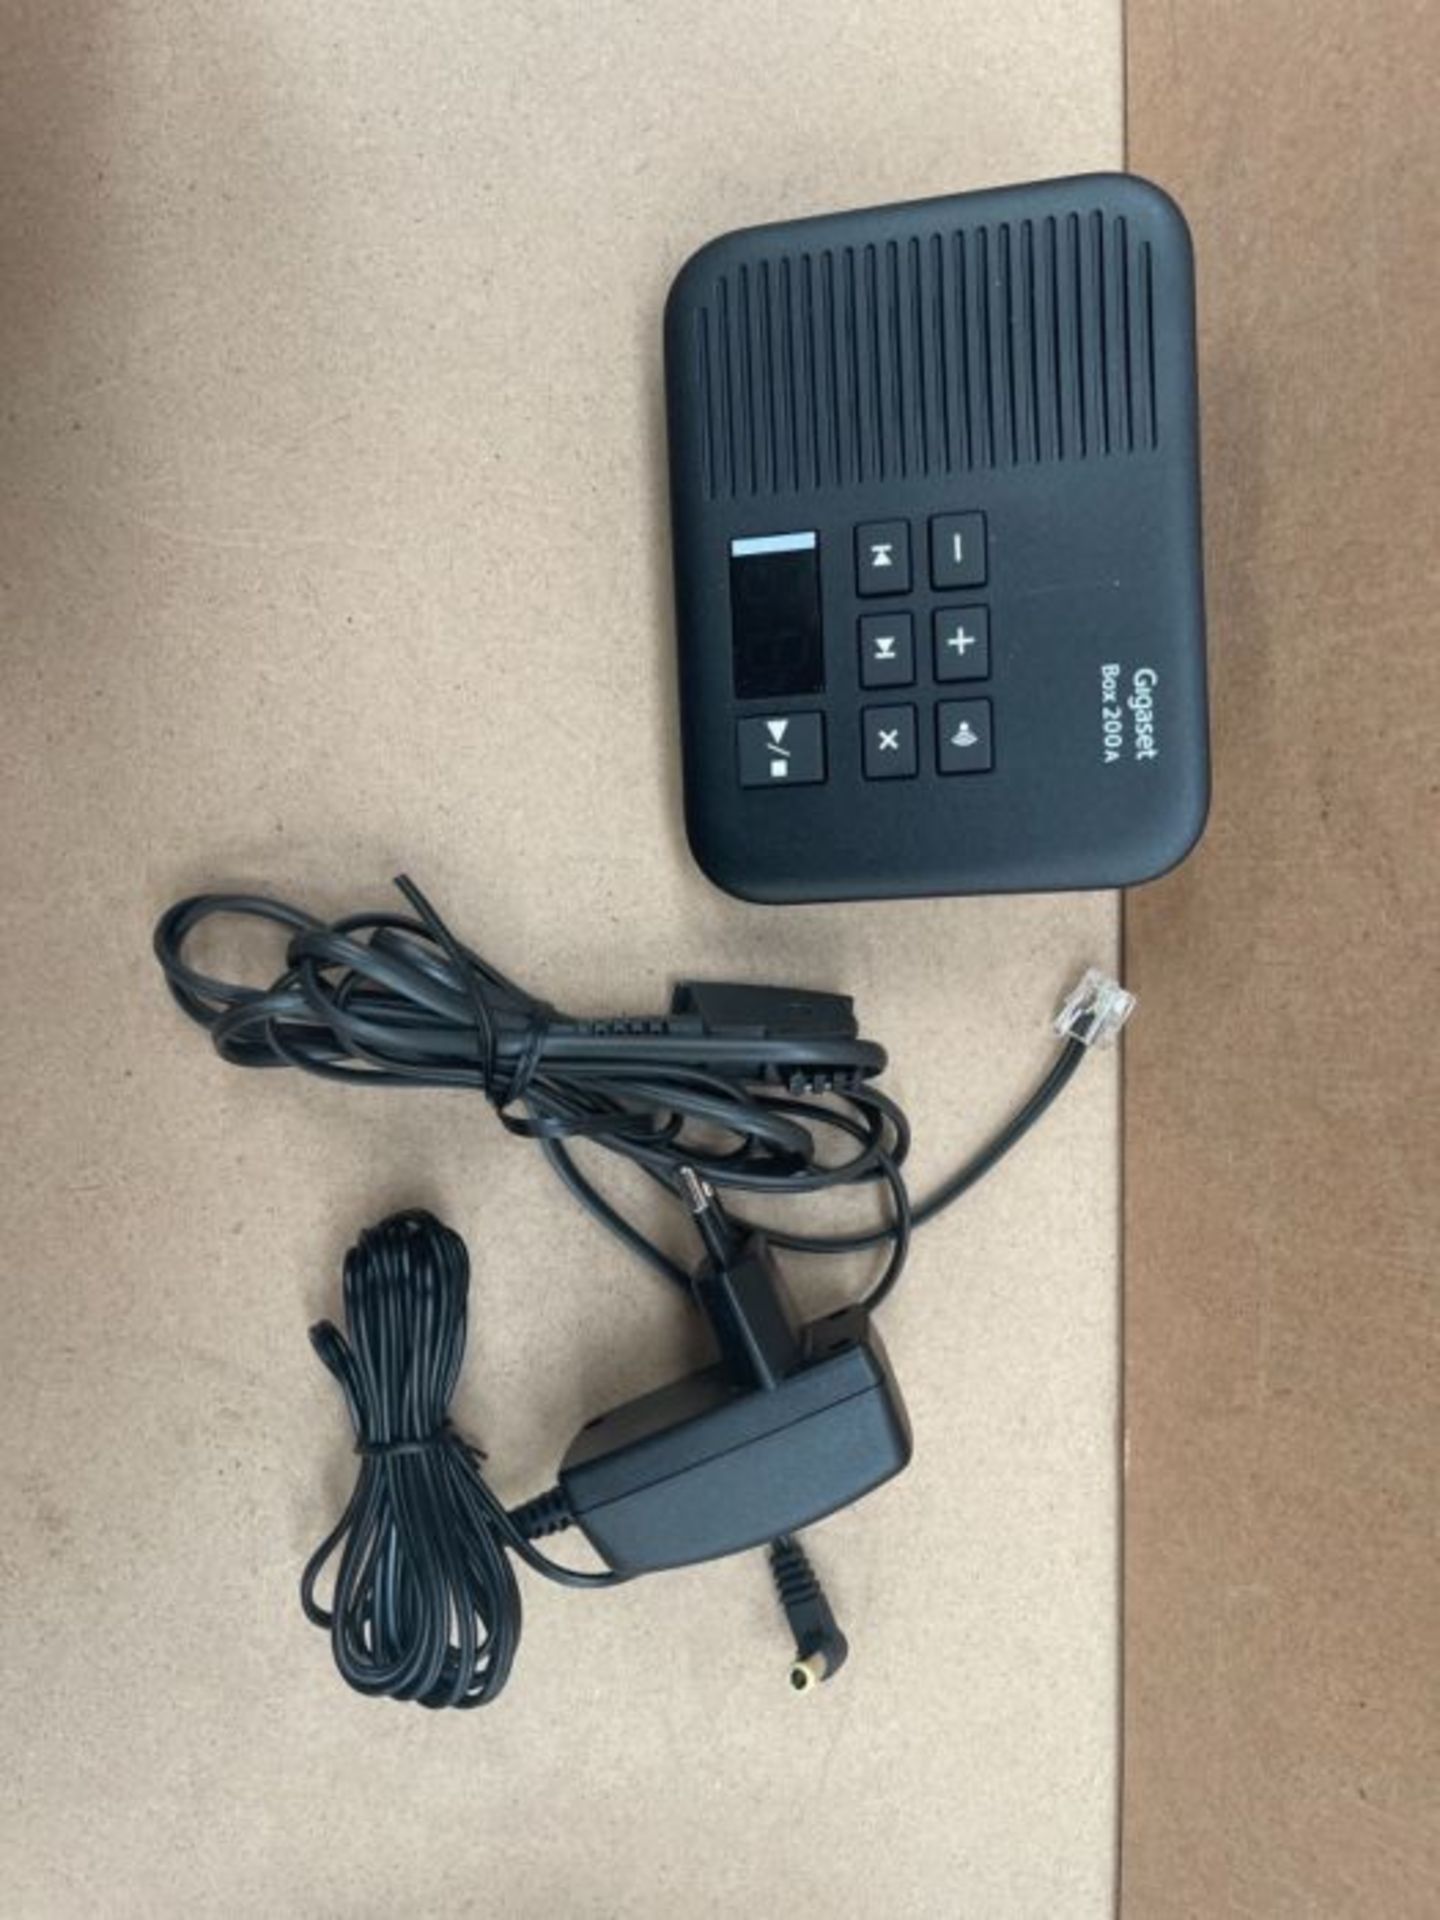 Gigaset Box 200A DECT-Telefonbasis with answering machine - black - Image 2 of 2